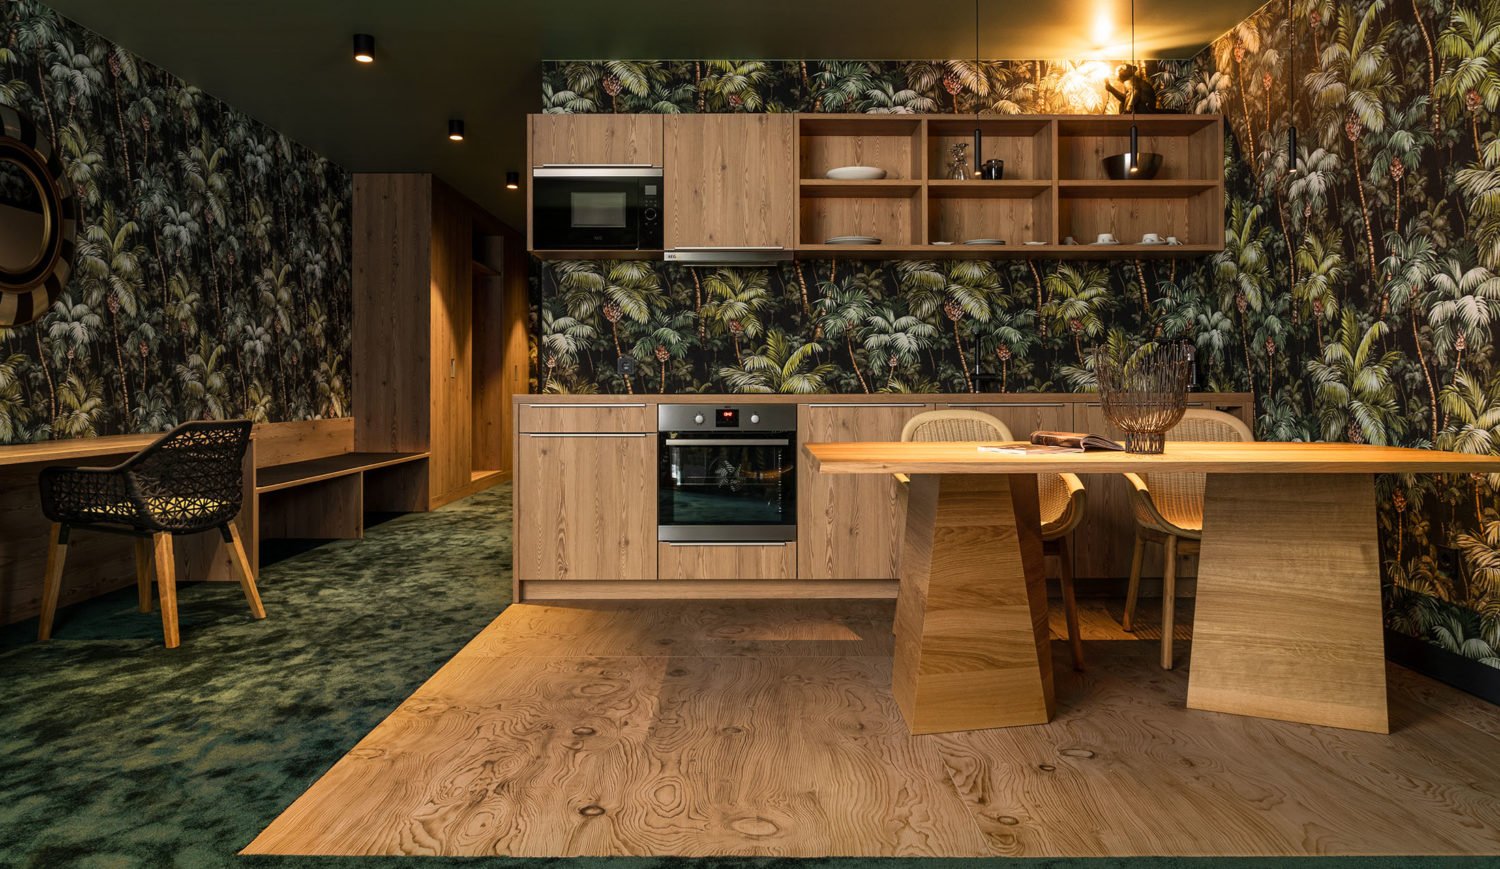 Vacation with primordial foliage - green forest tones dominate in the suite Mogli